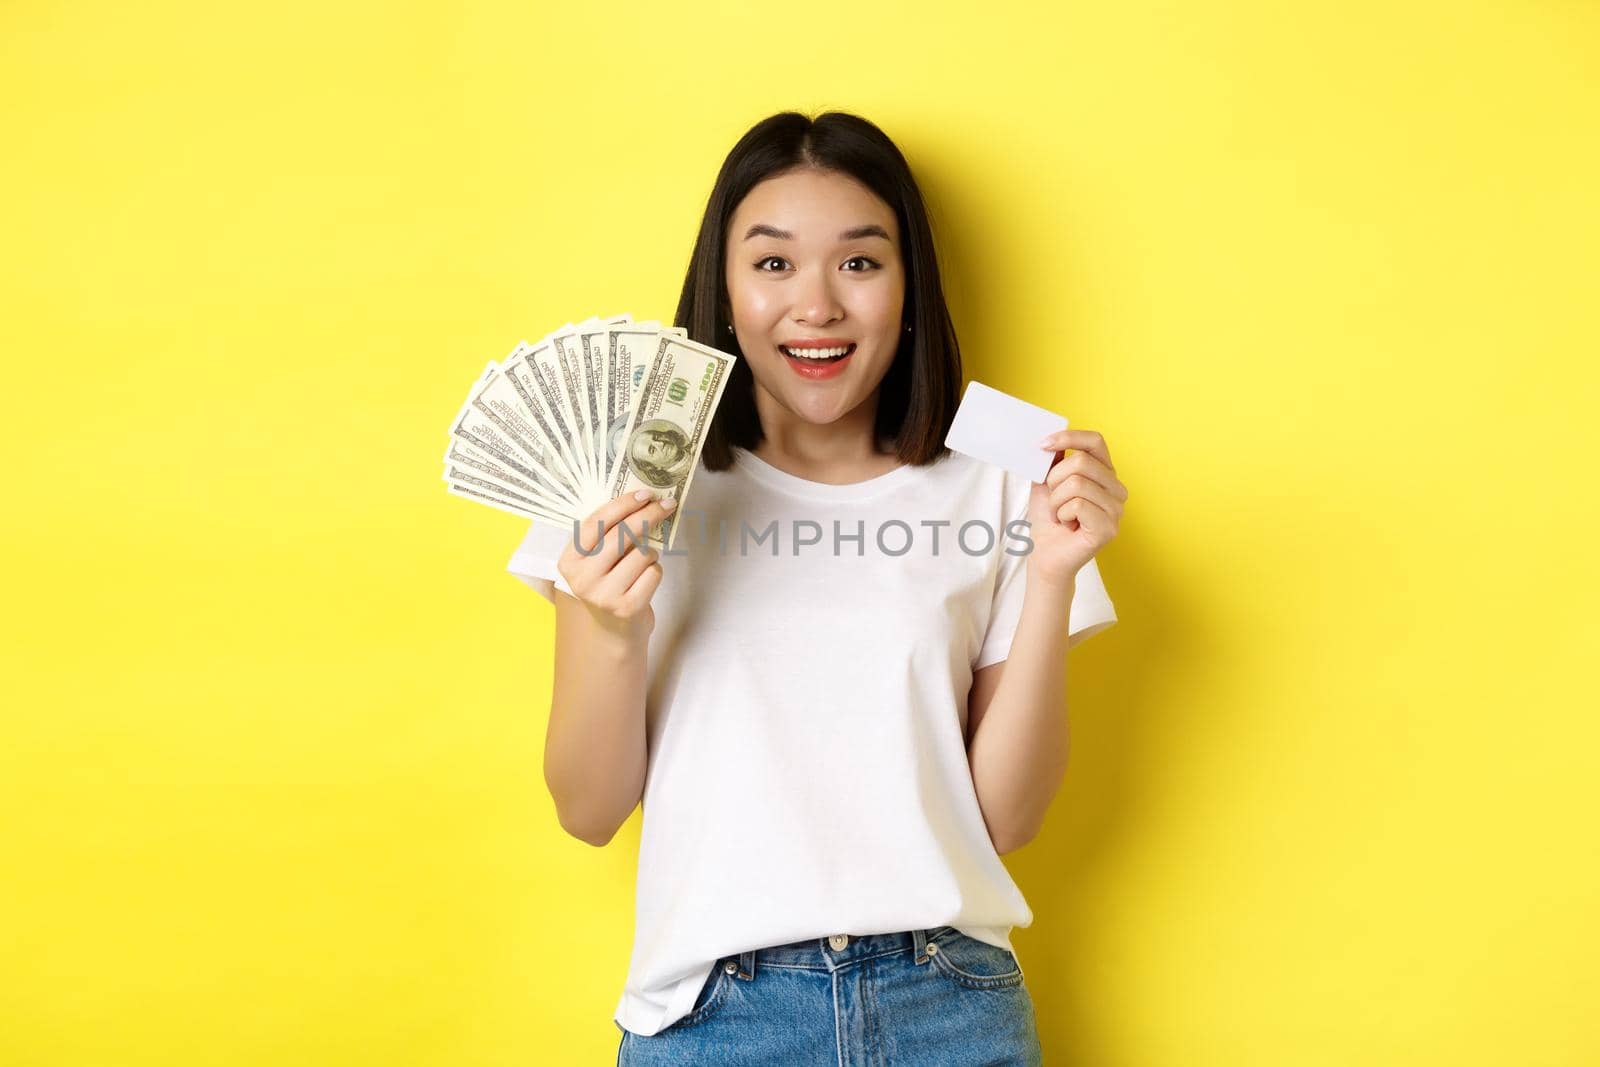 Beautiful asian woman with short dark hair, wearing white t-shirt, showing money in dollars and plastic credit card, standing over yellow background.